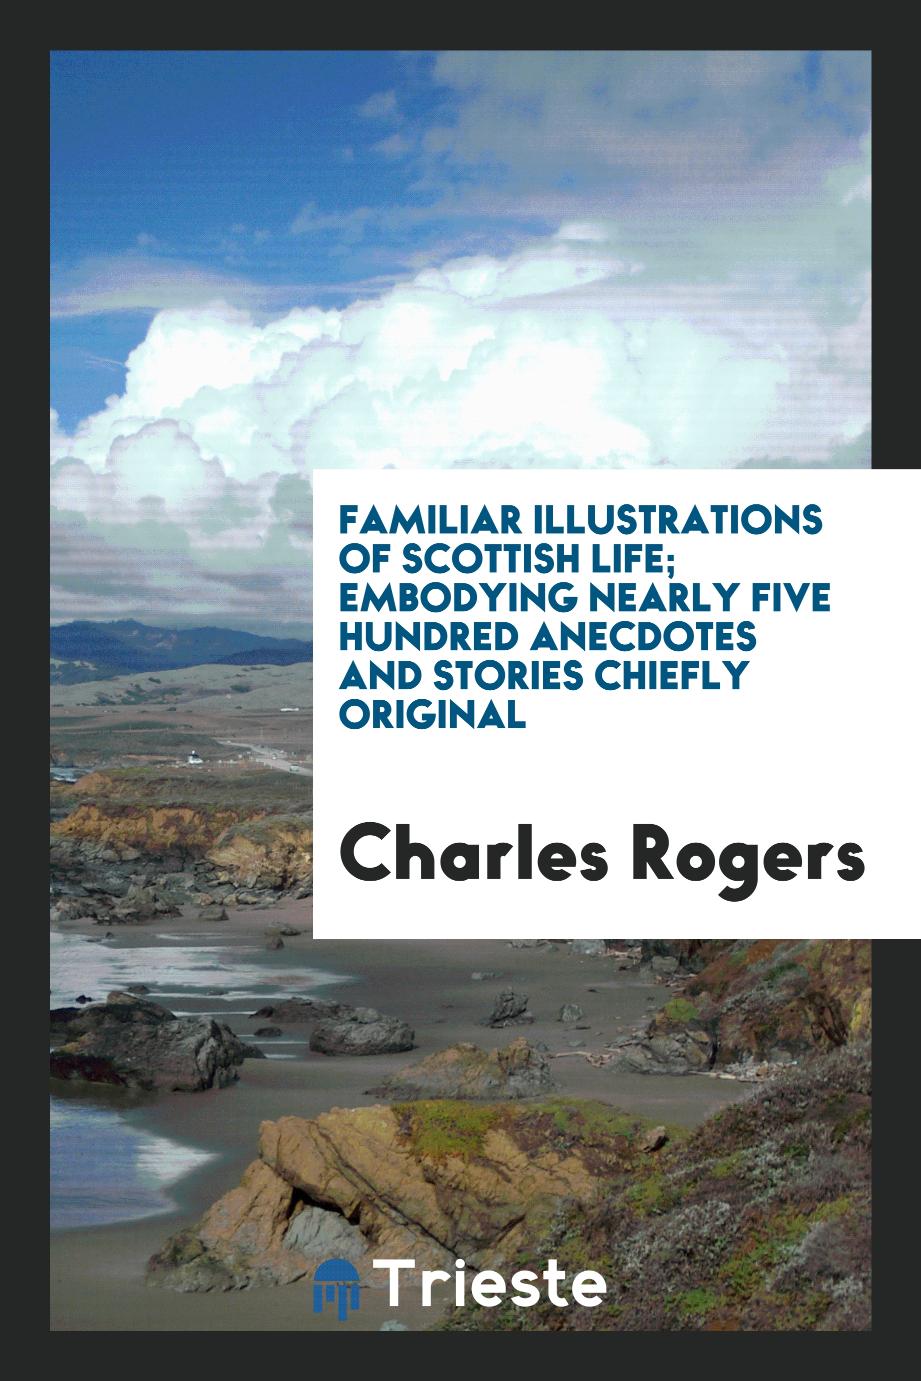 Familiar illustrations of Scottish life; embodying nearly five hundred anecdotes and stories chiefly original